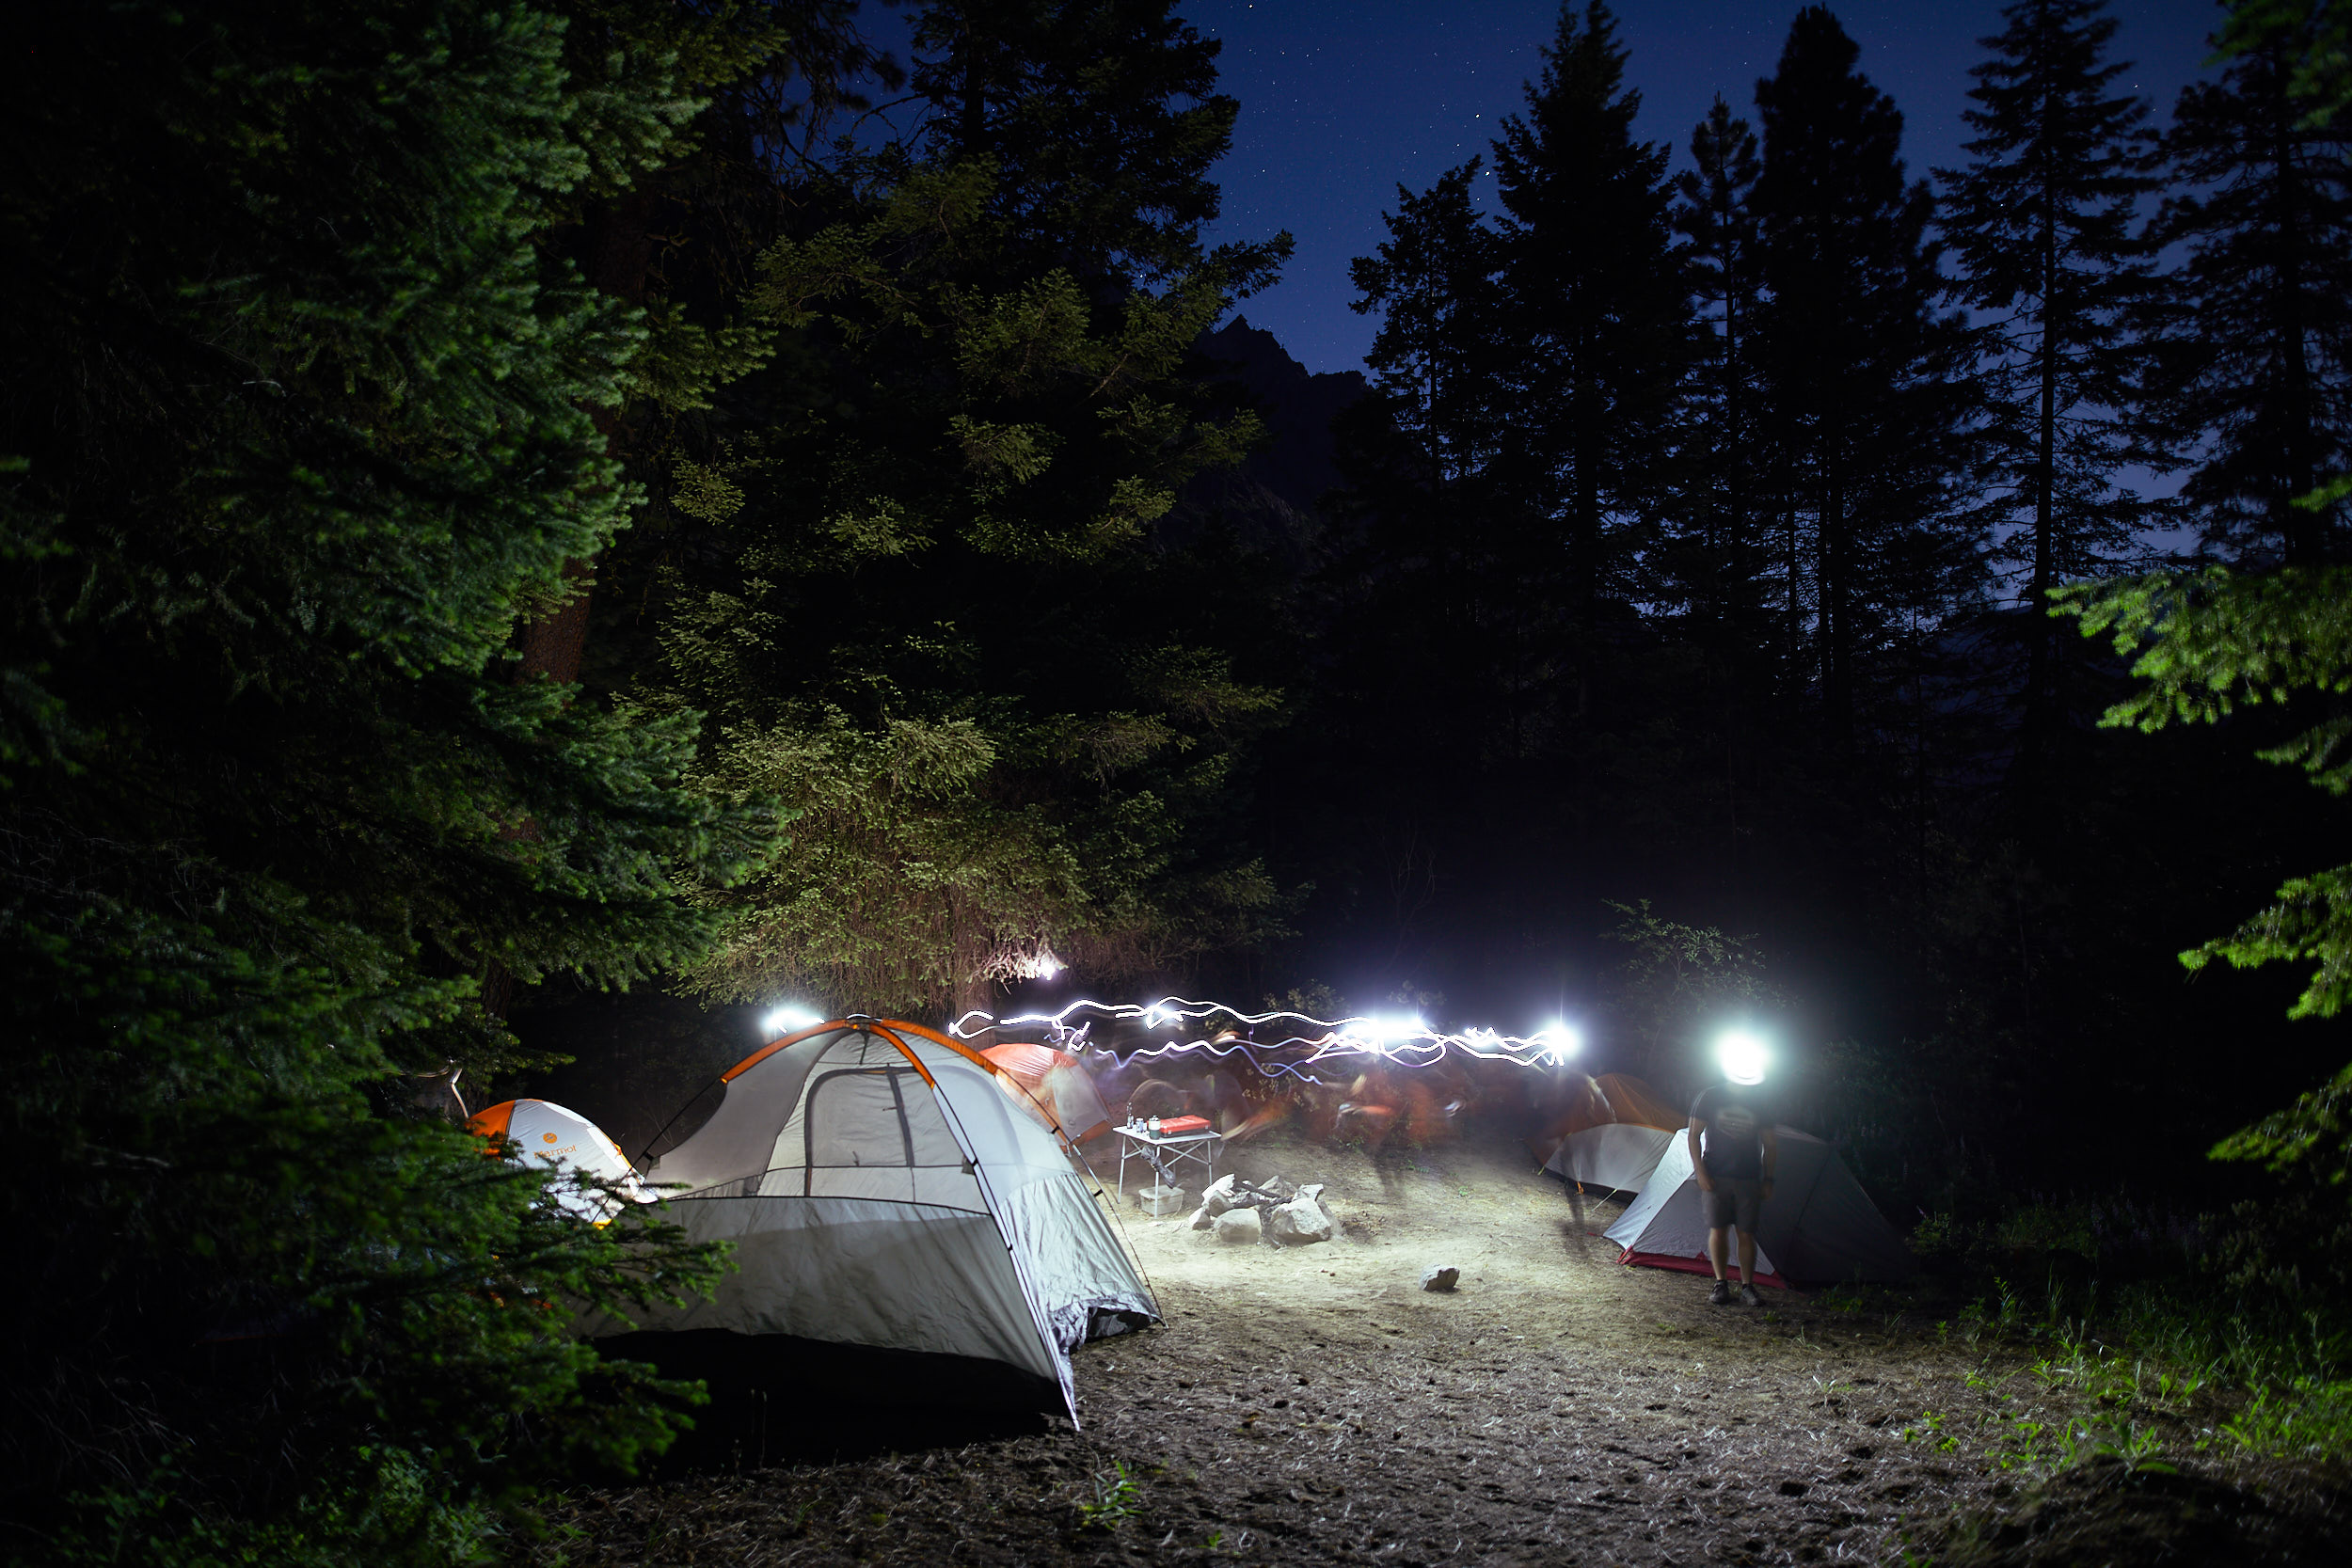  The 5 hour drive from Vancouver had us setting up camp in the dark. 